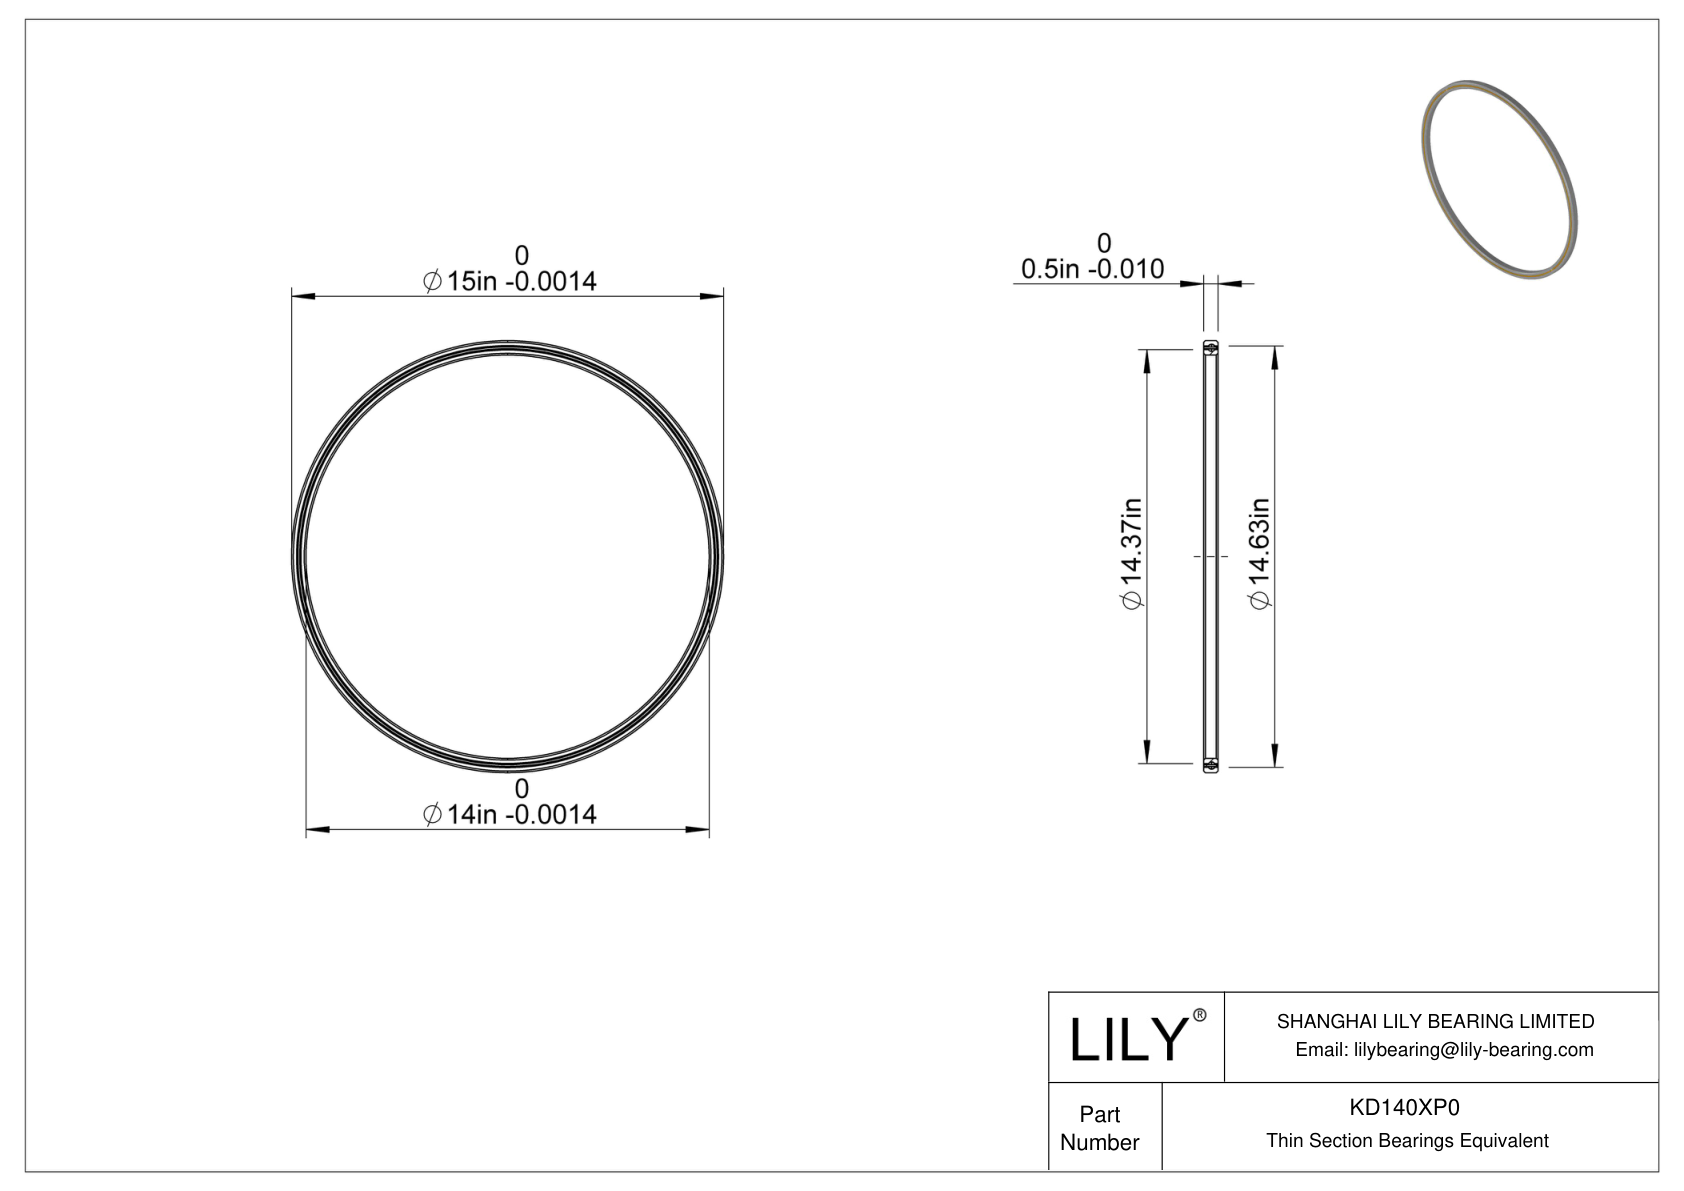 KD140XP0 Constant Section (CS) Bearings cad drawing